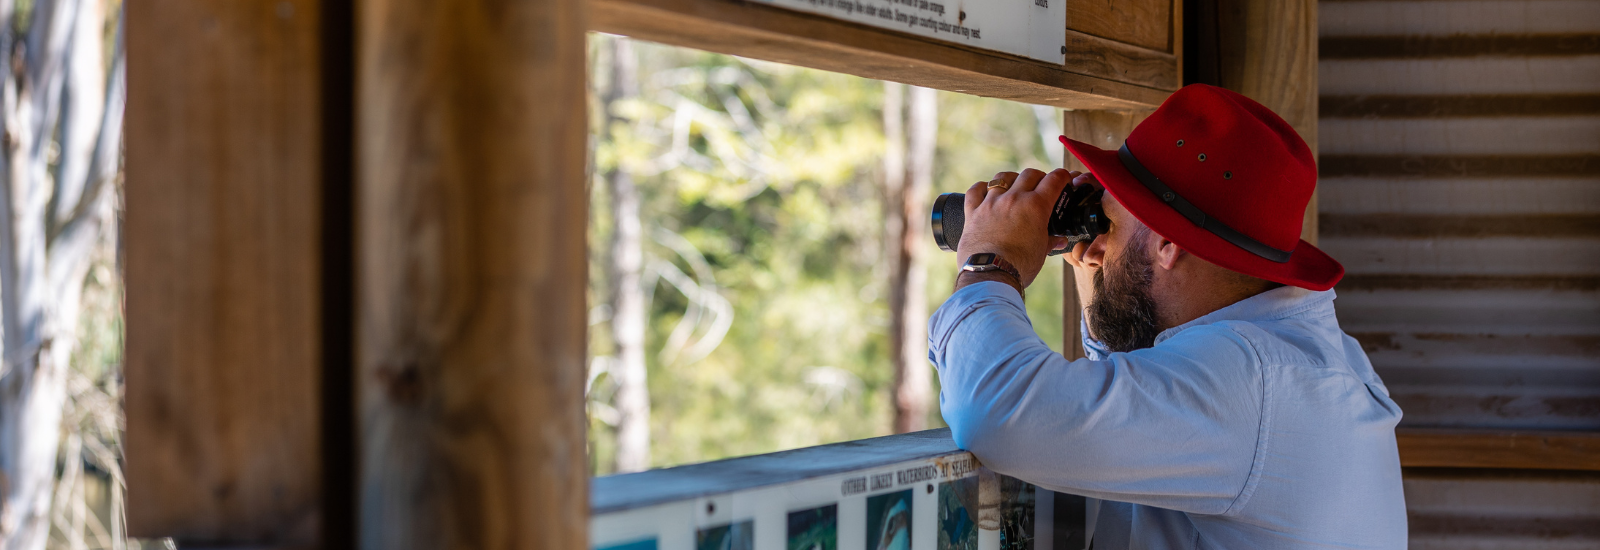 Man using telescope at a national park banner image